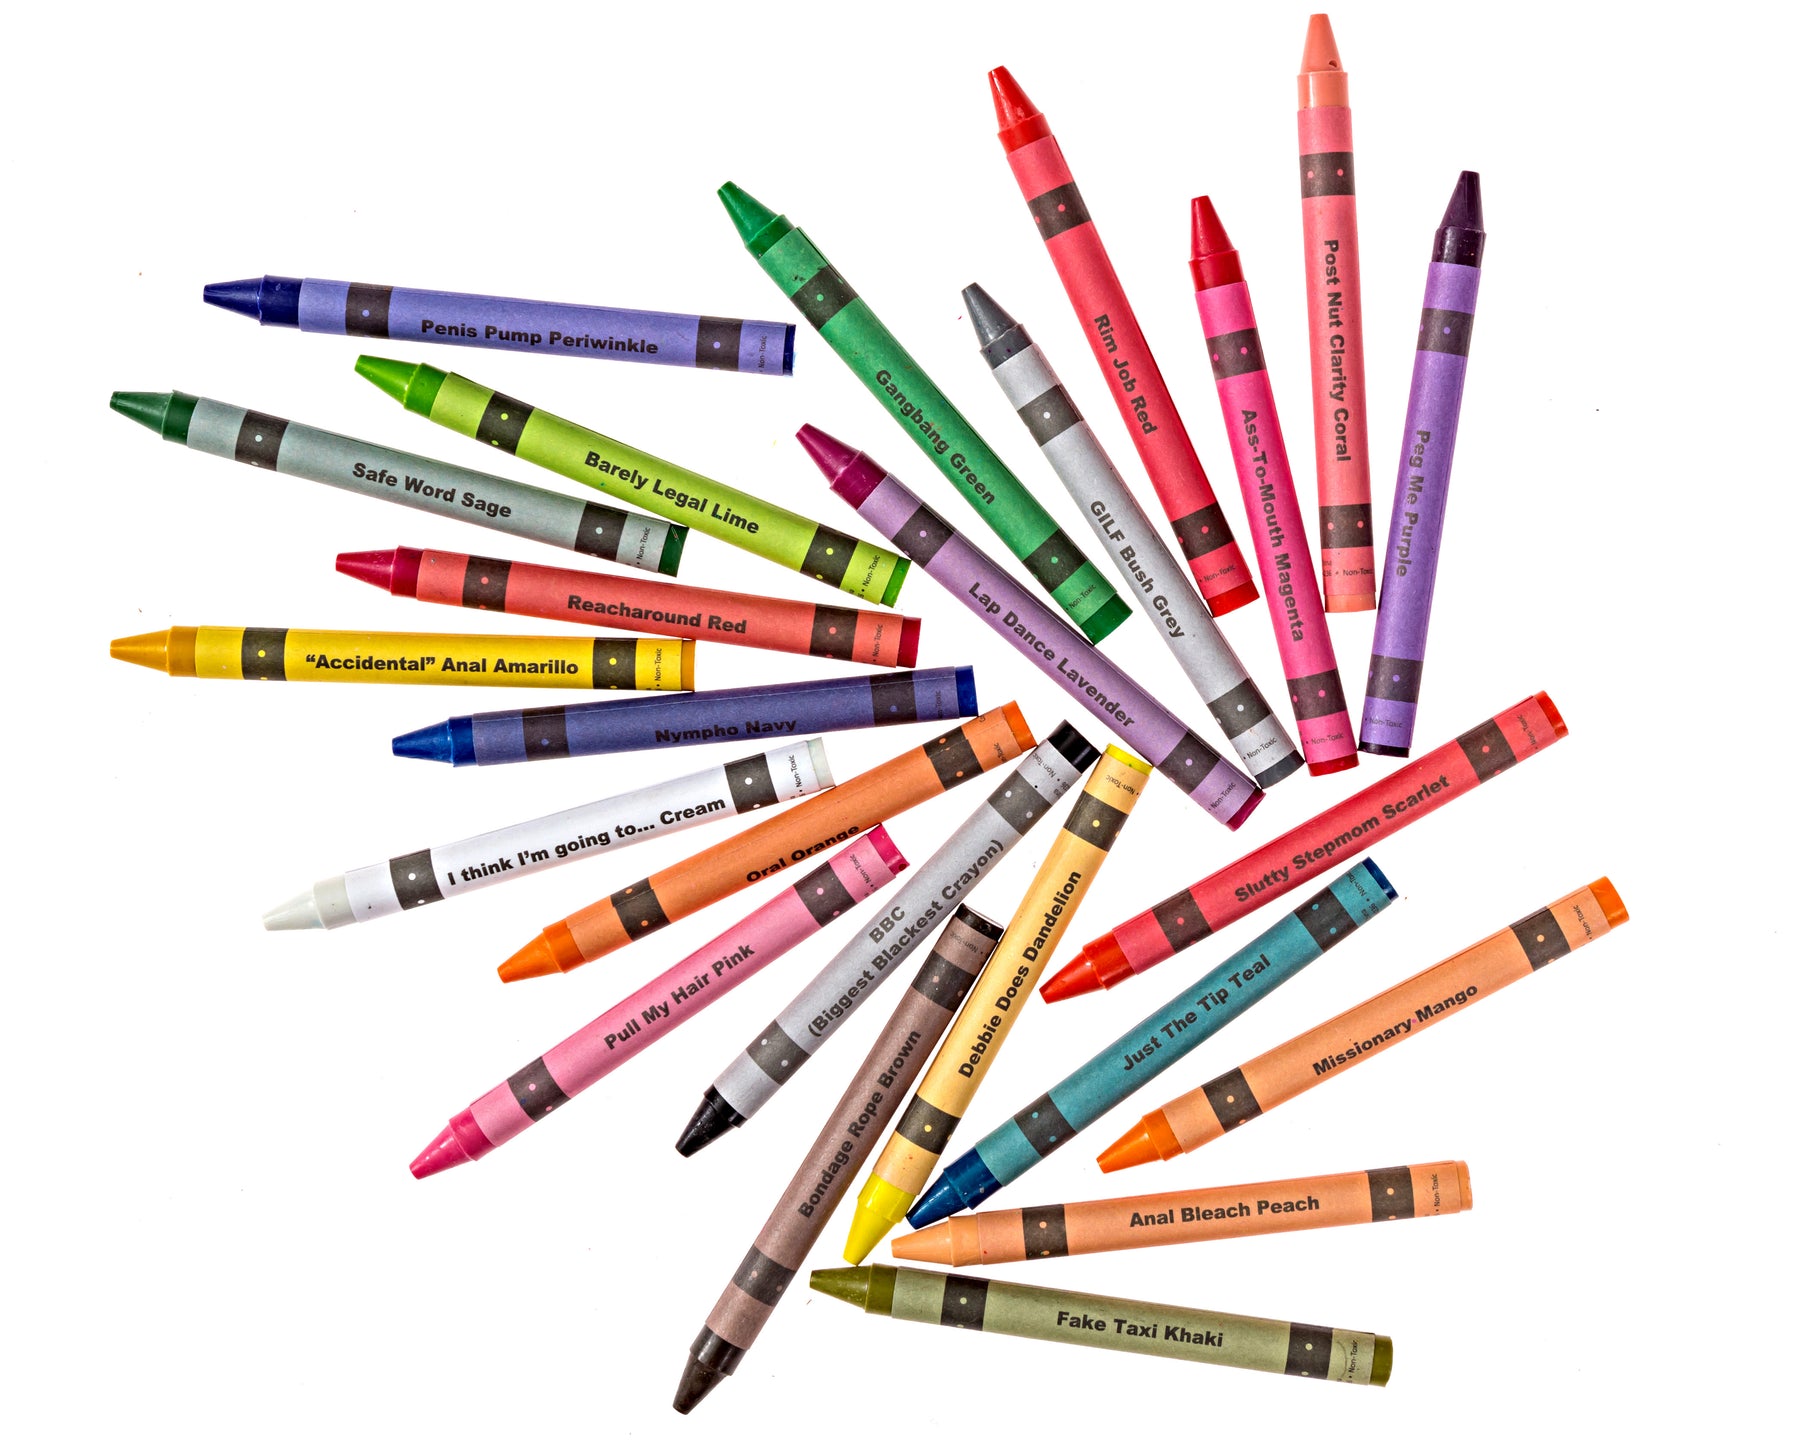 Wholesale Offensive Crayons: Porn Pack Edition for your store - Faire